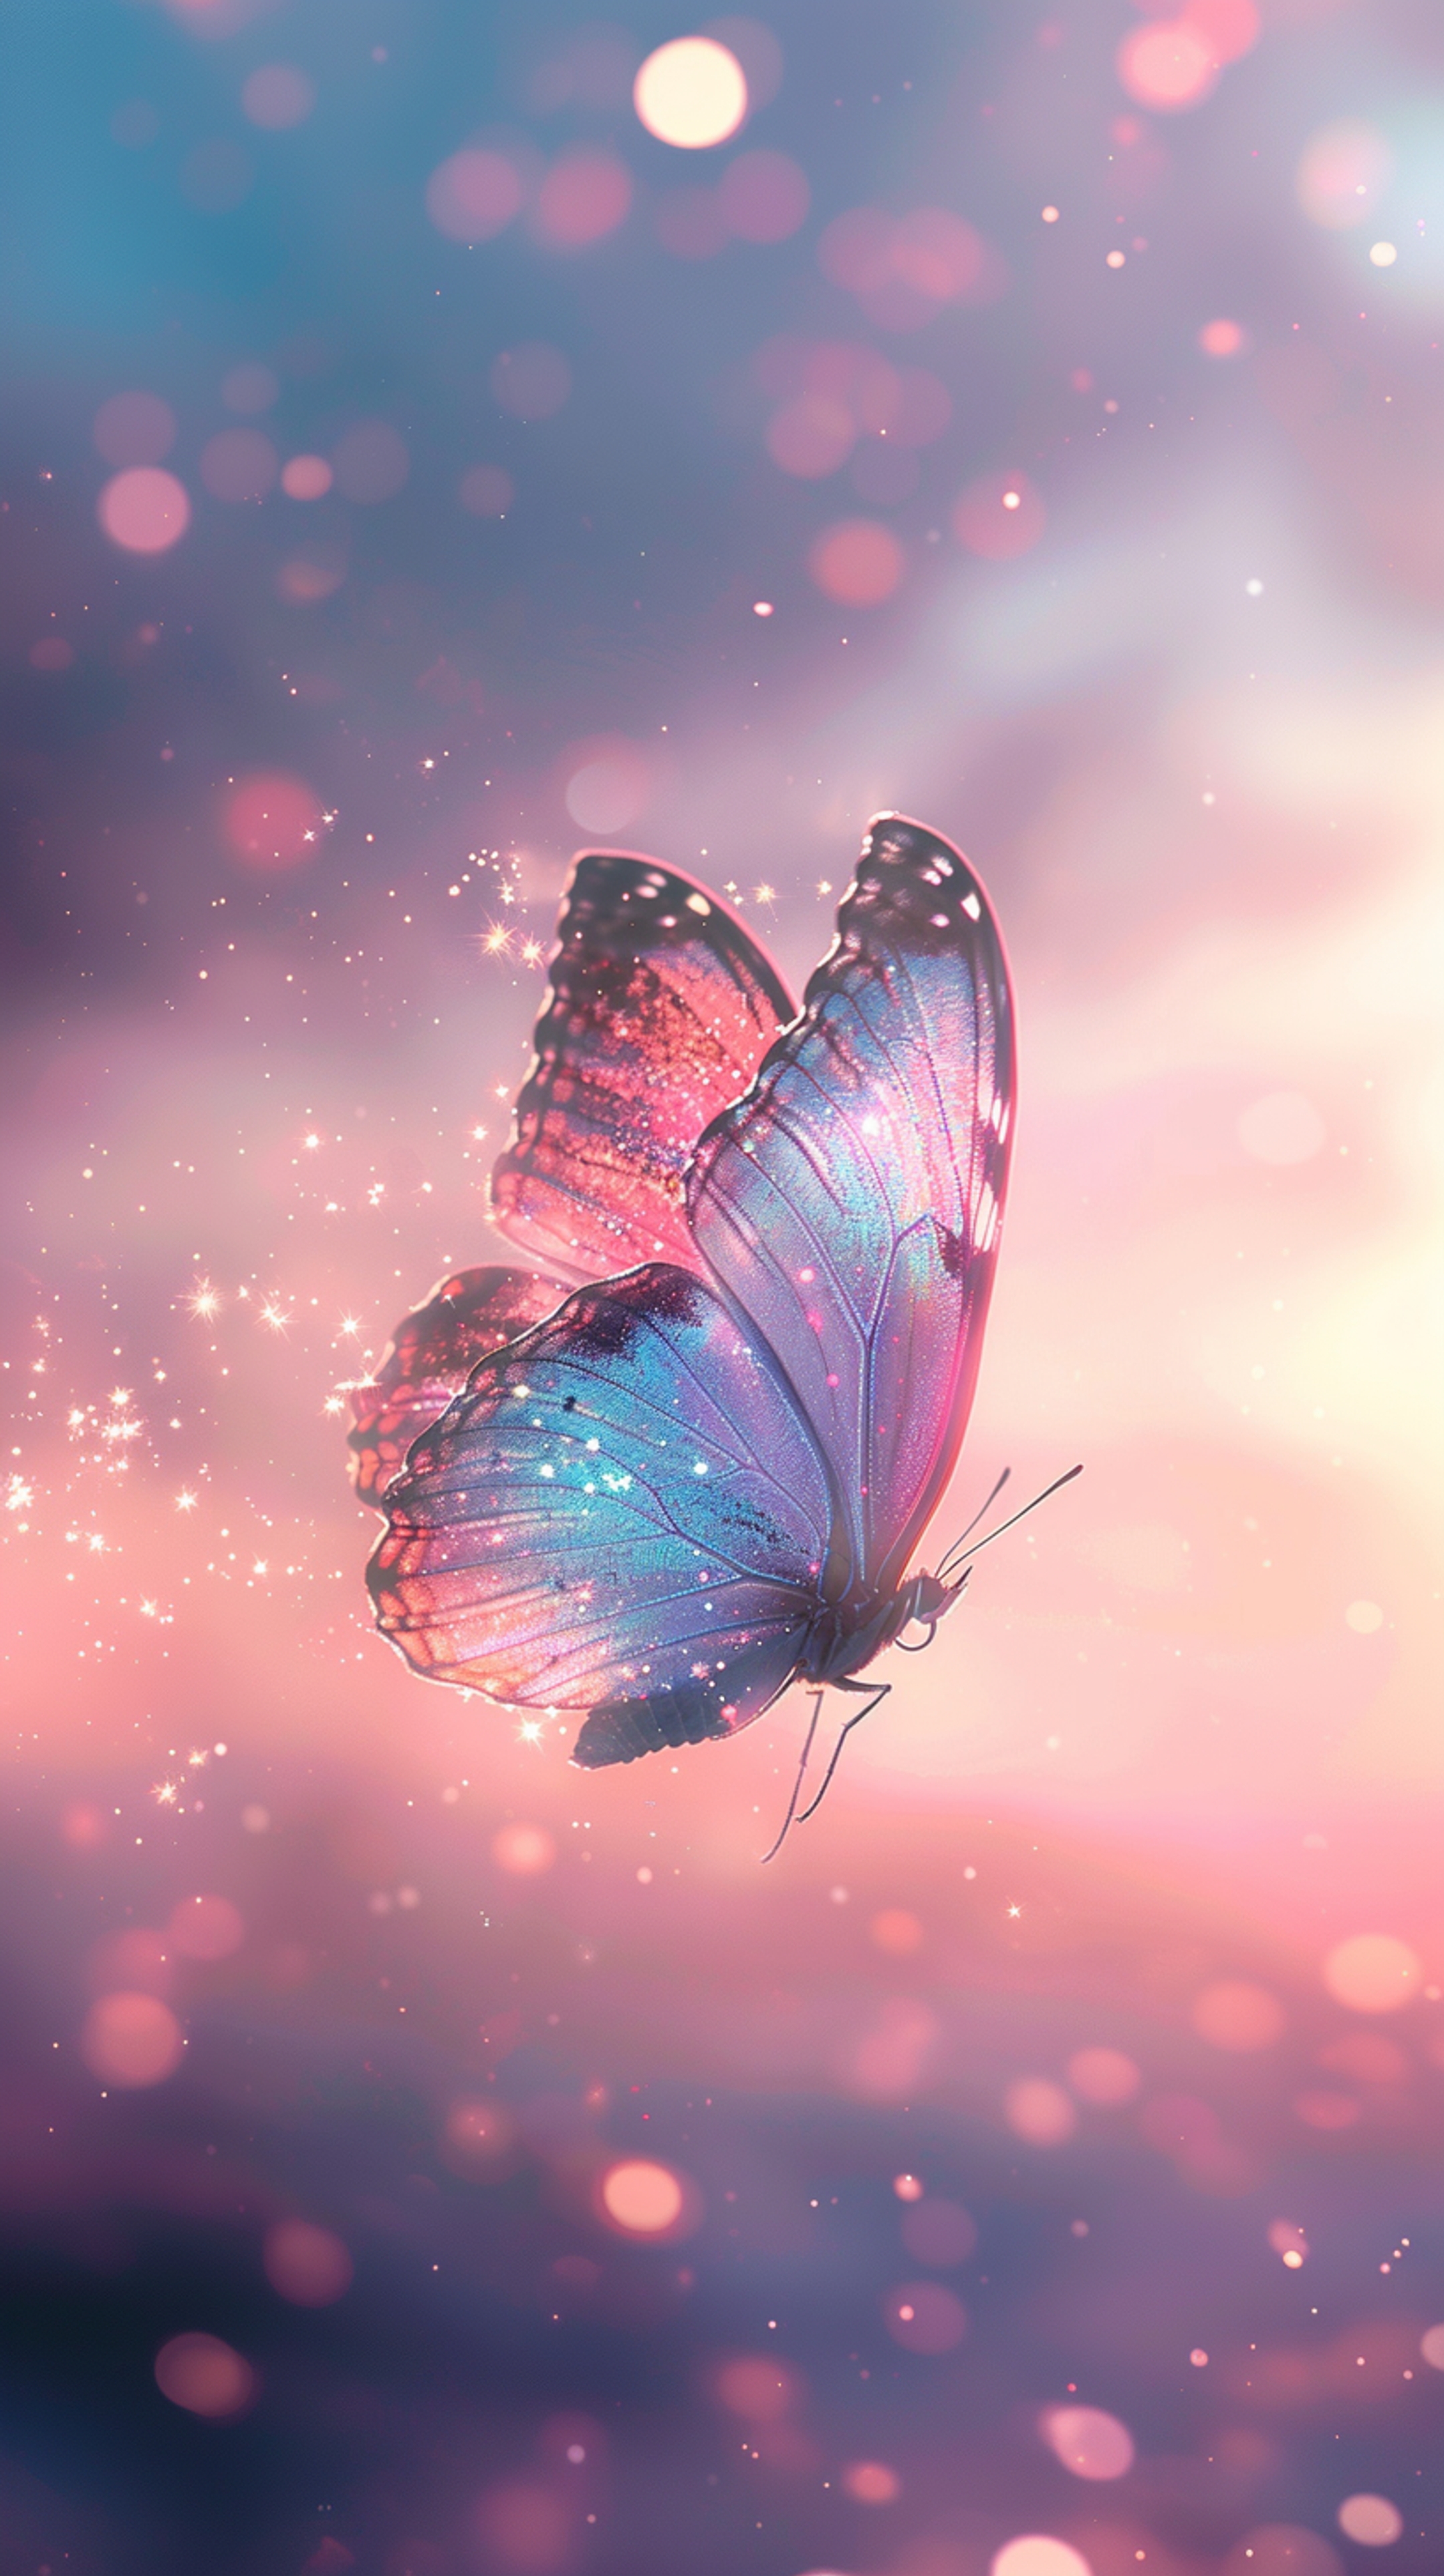 Magical Sparkling Butterfly in Dreamy Pink Sky Tapet[1278b2409cd84640a5d9]